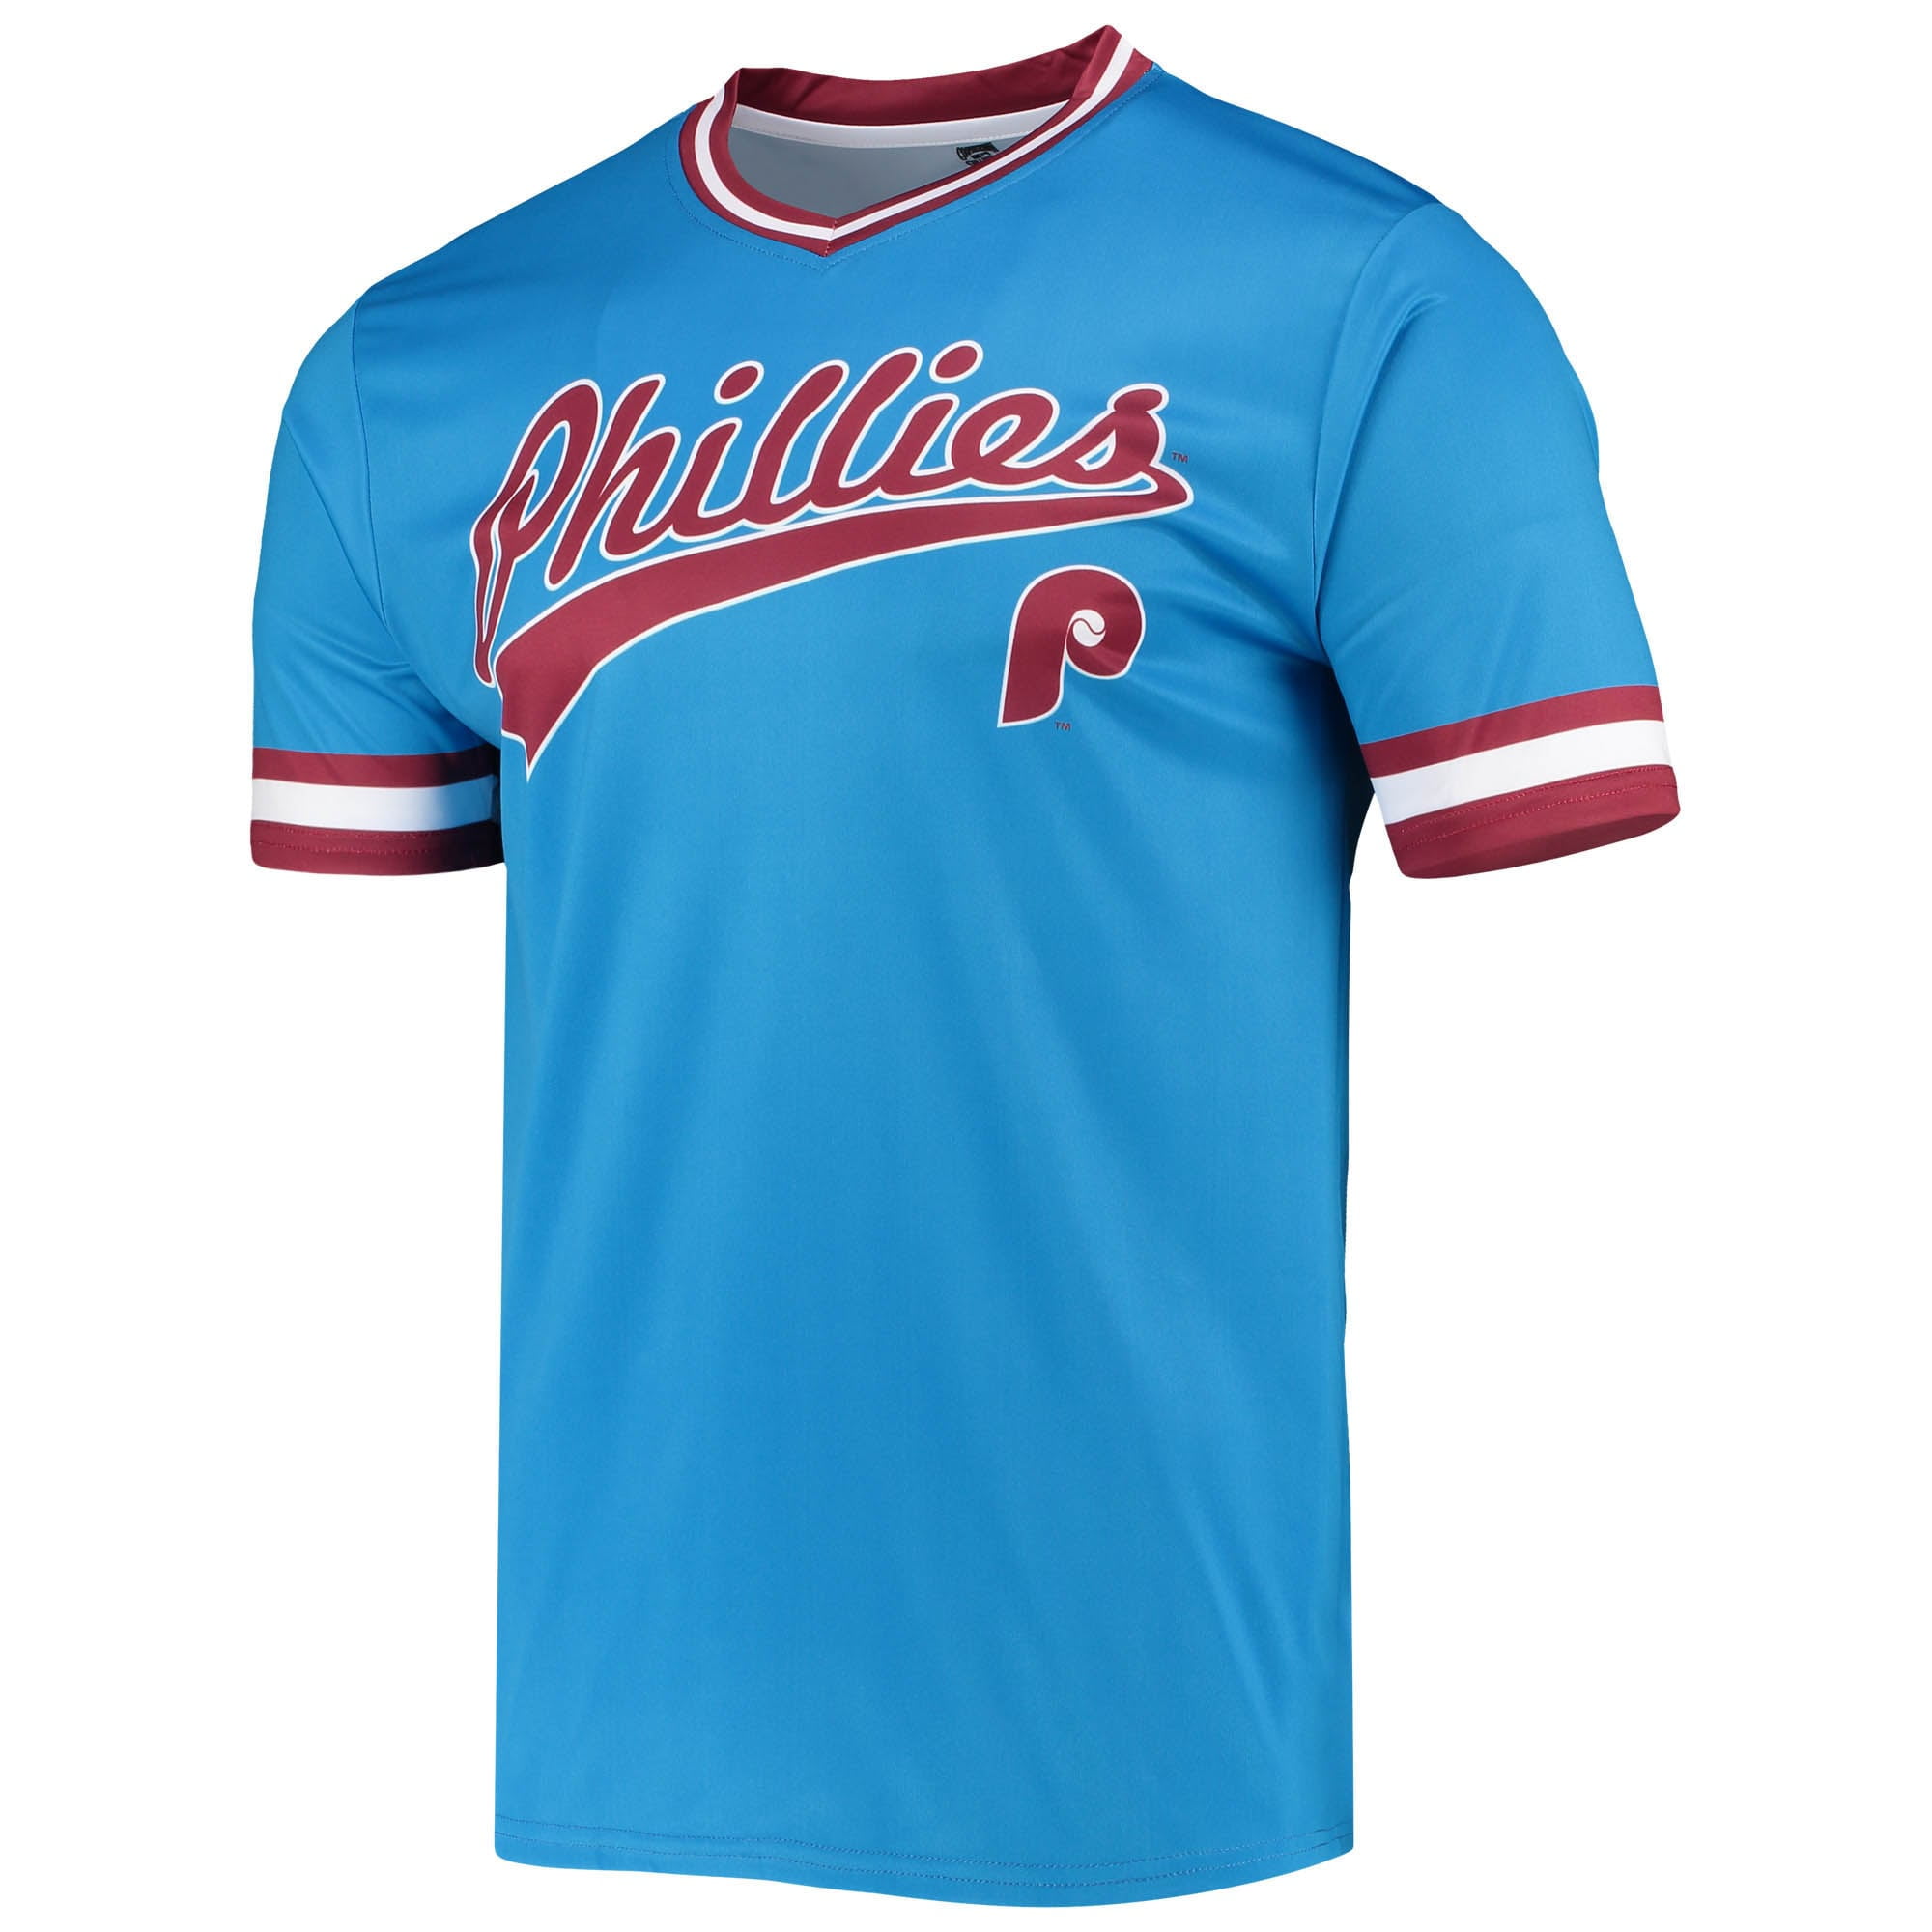 blue and maroon phillies jersey